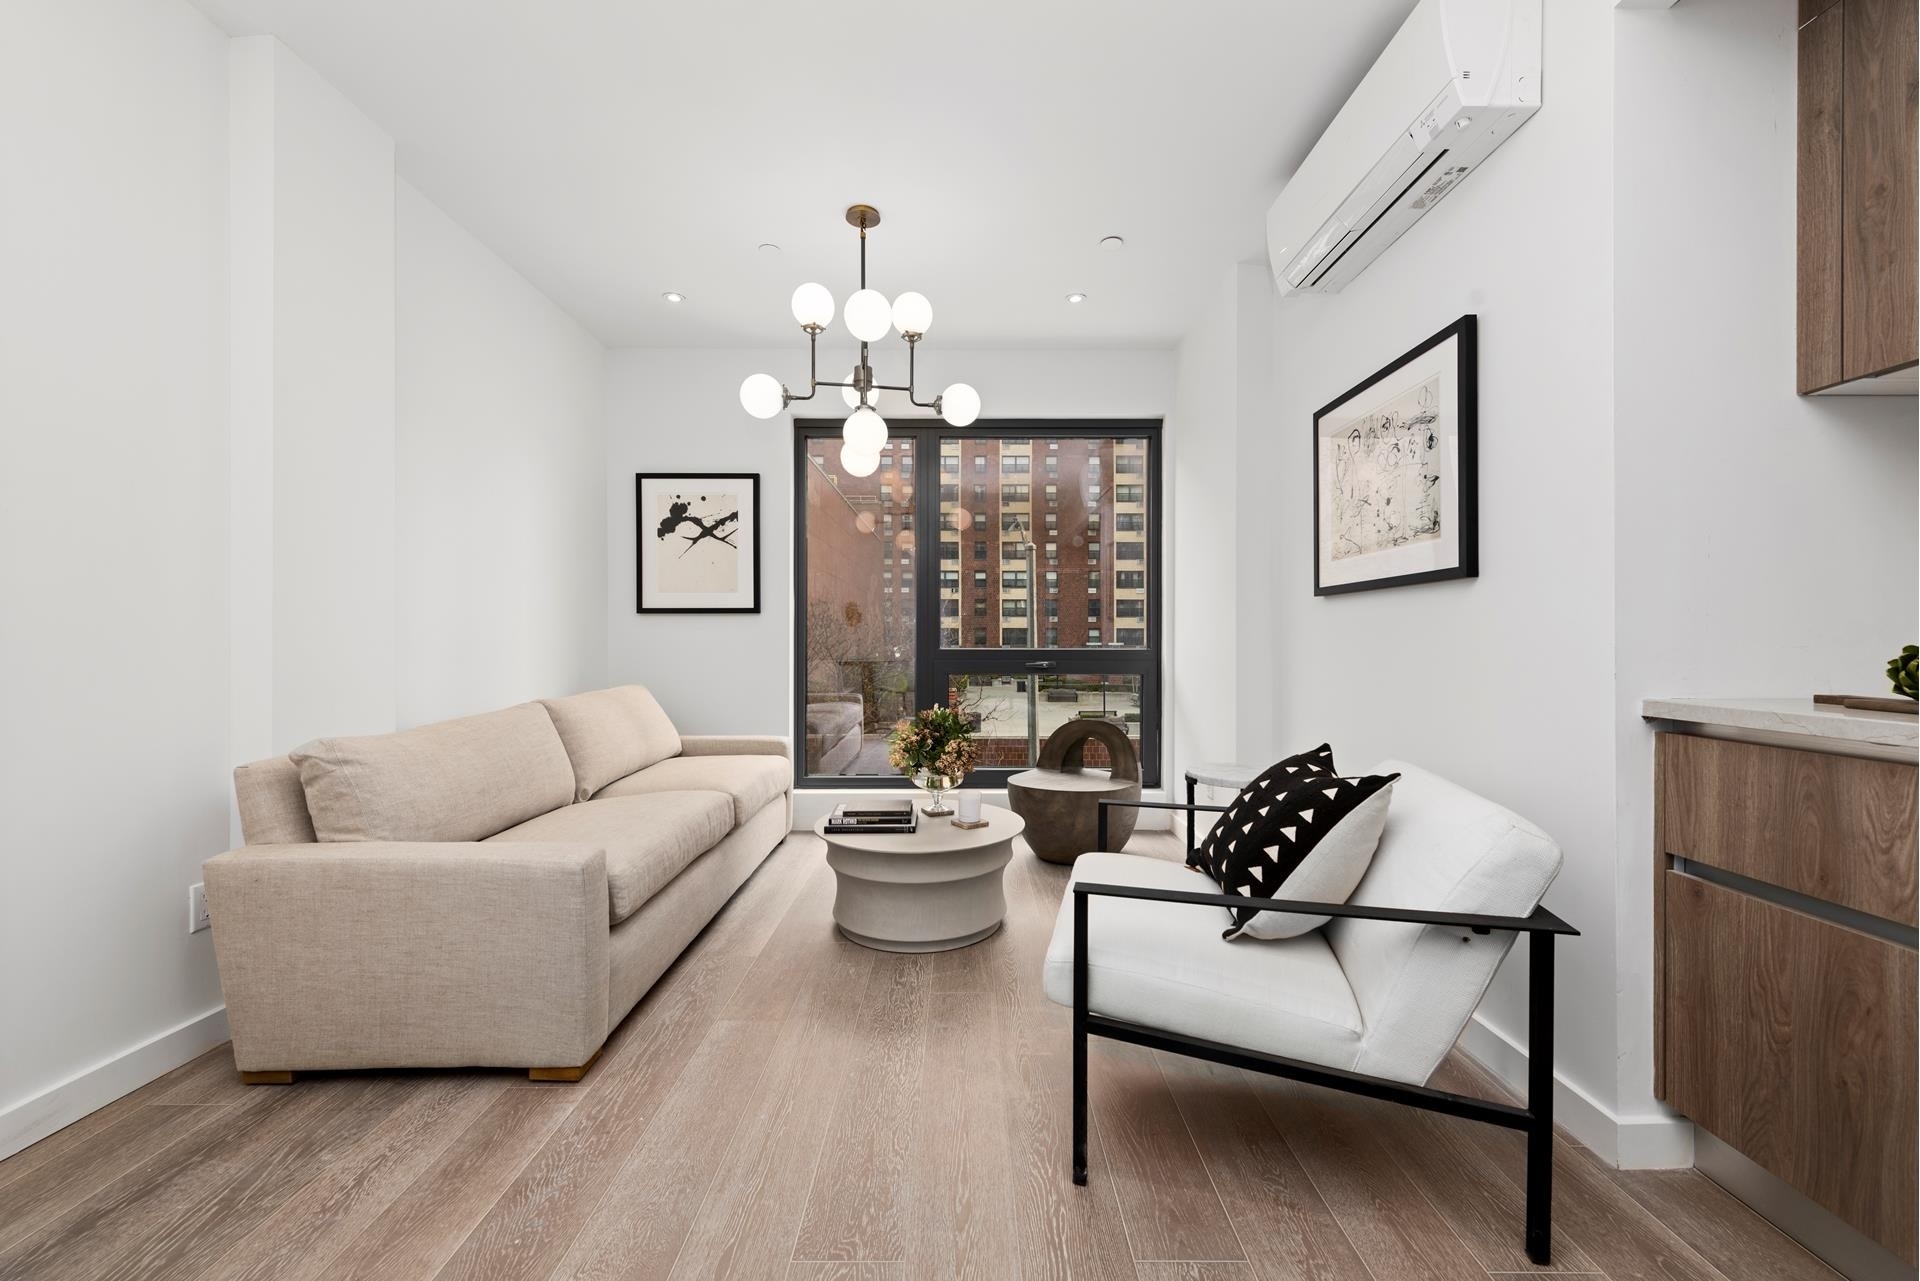 Condominium for Sale at Alston, 308 W 133RD ST, 11D Central Harlem, New York, NY 10030